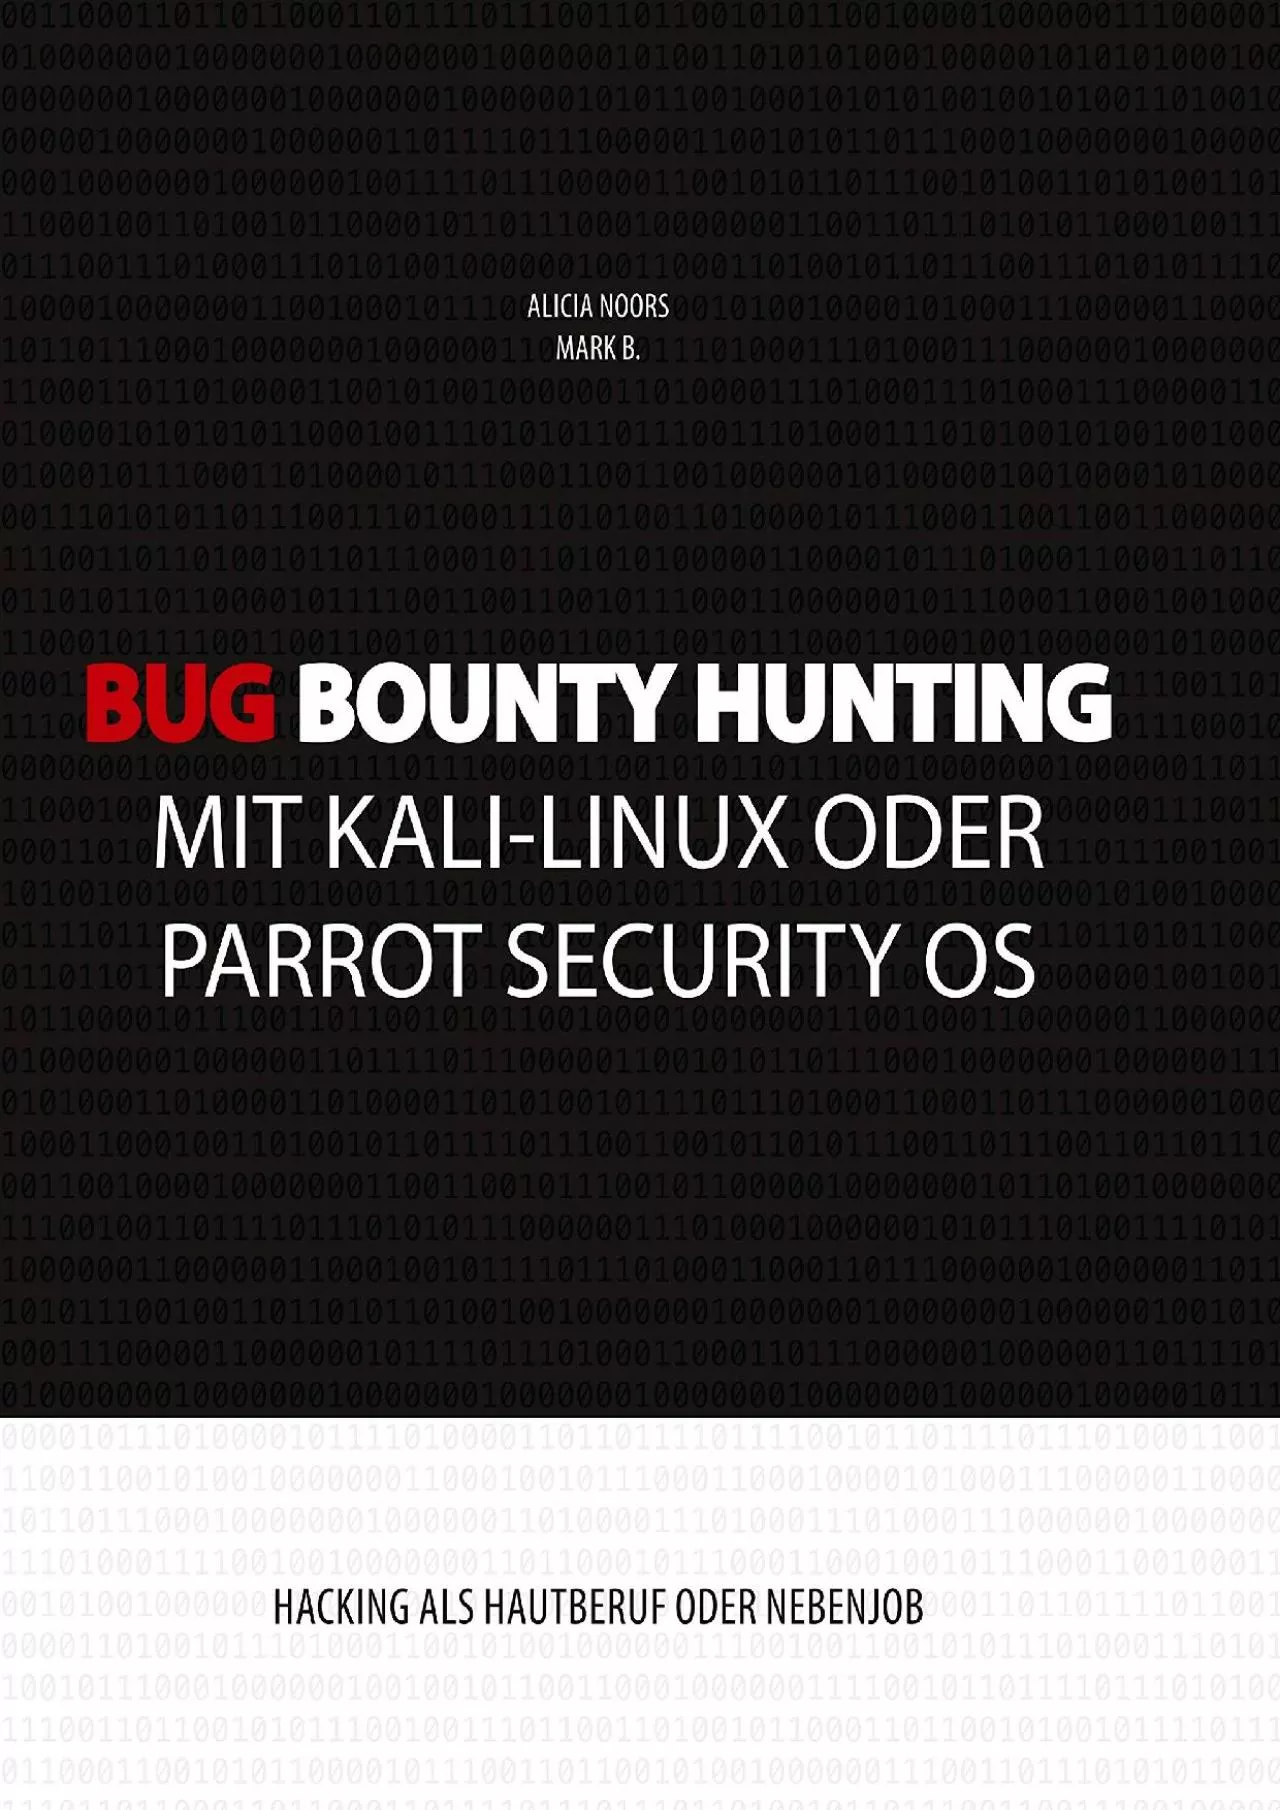 [READING BOOK]-Bug Bounty Hunting mit Kali-Linux oder Parrot Security OS: Hacking als